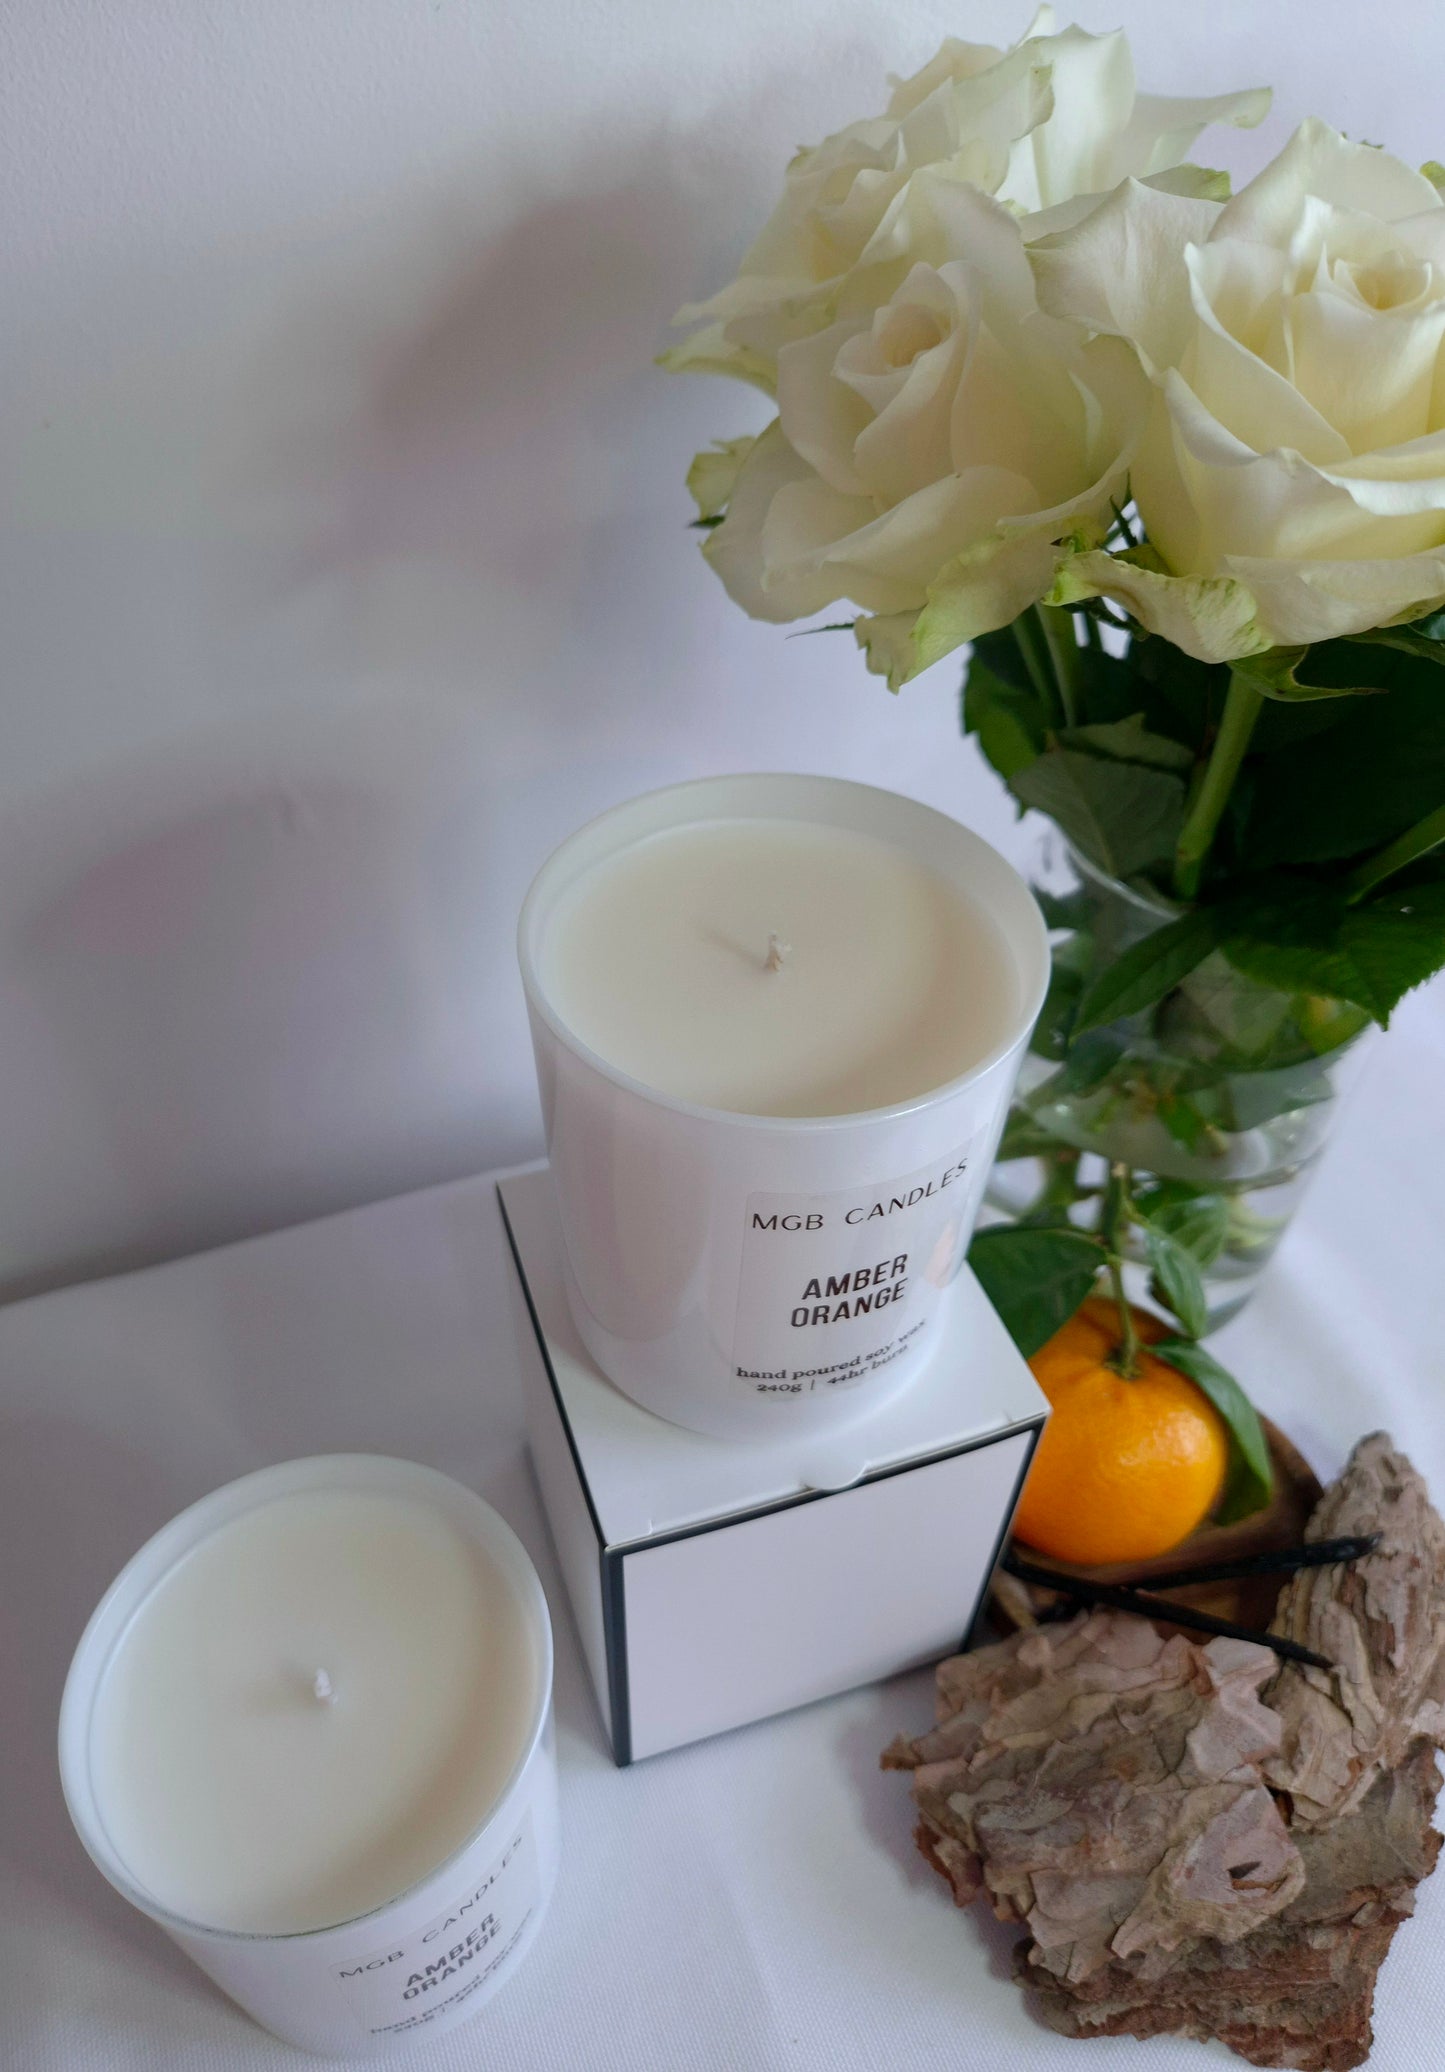 AMBER ORANGE & VANILLA, White Gloss and Pearl Mica Wax Candle. Hand Poured Soy Wax, 260ml.